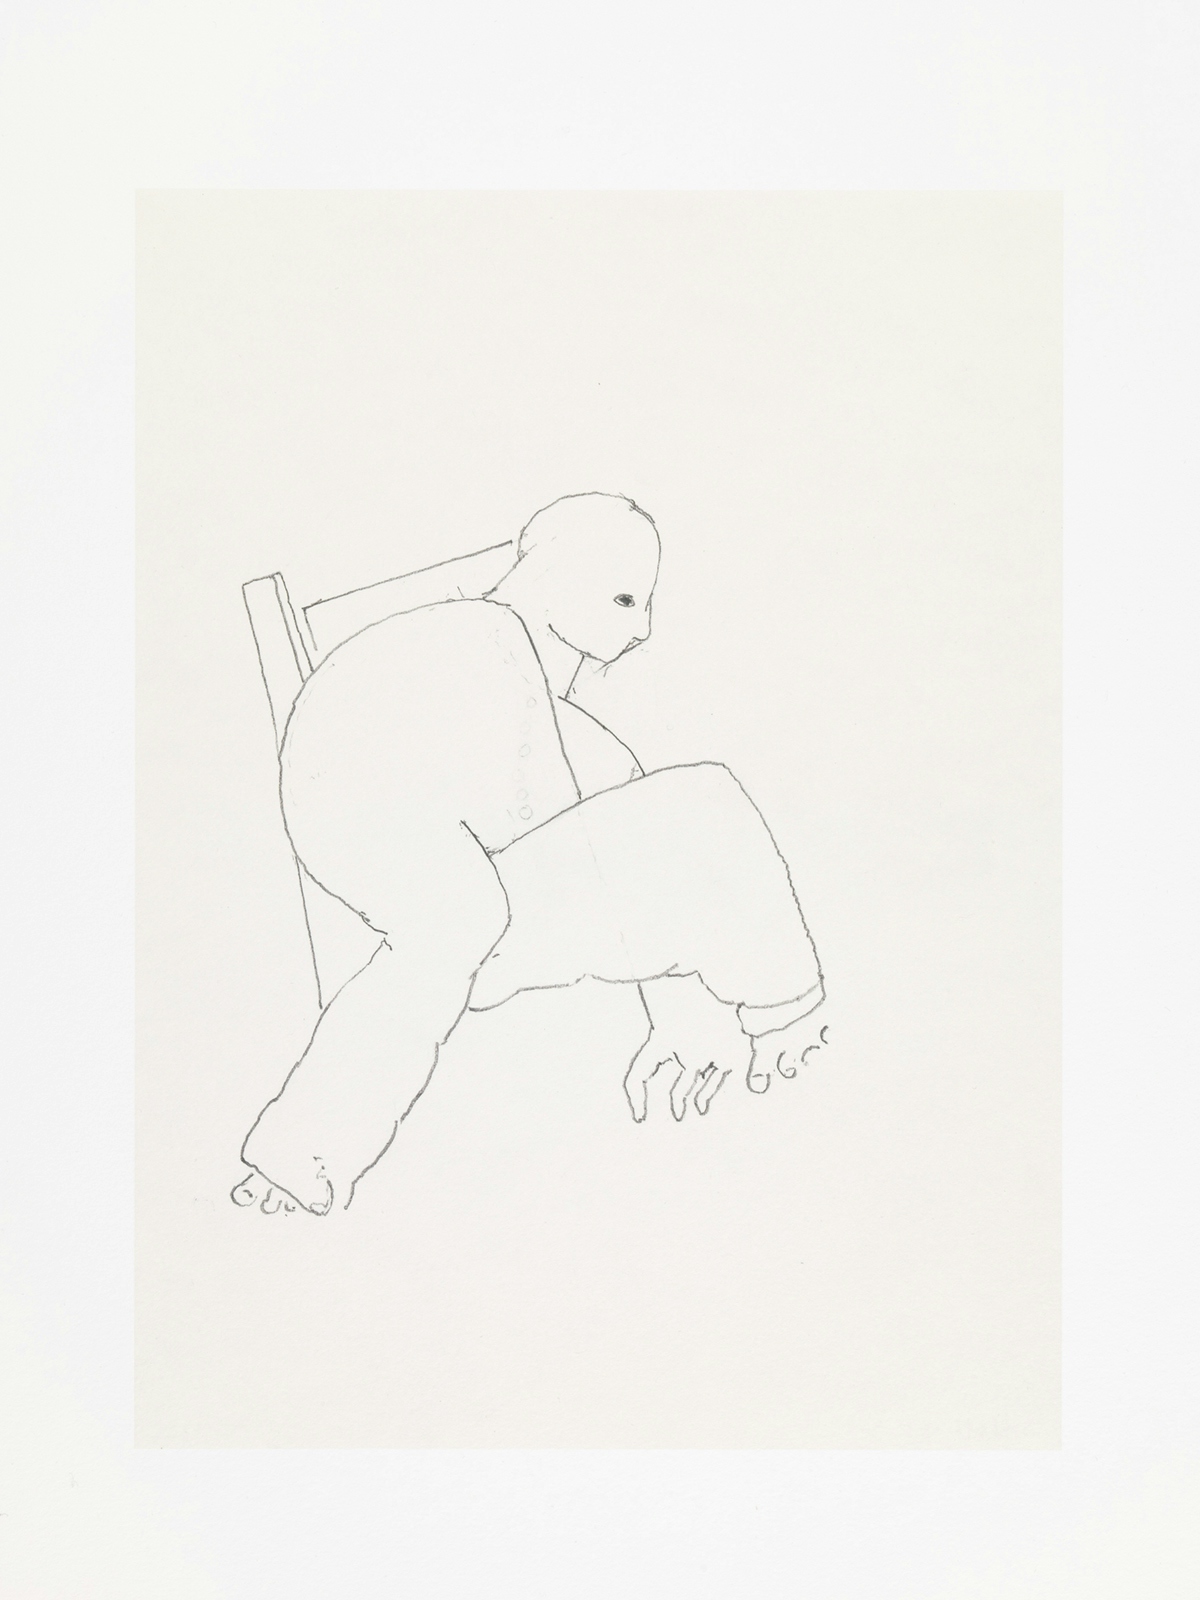 The image shows a black and white, rather abstract drawing of a twisted figure in a chair.